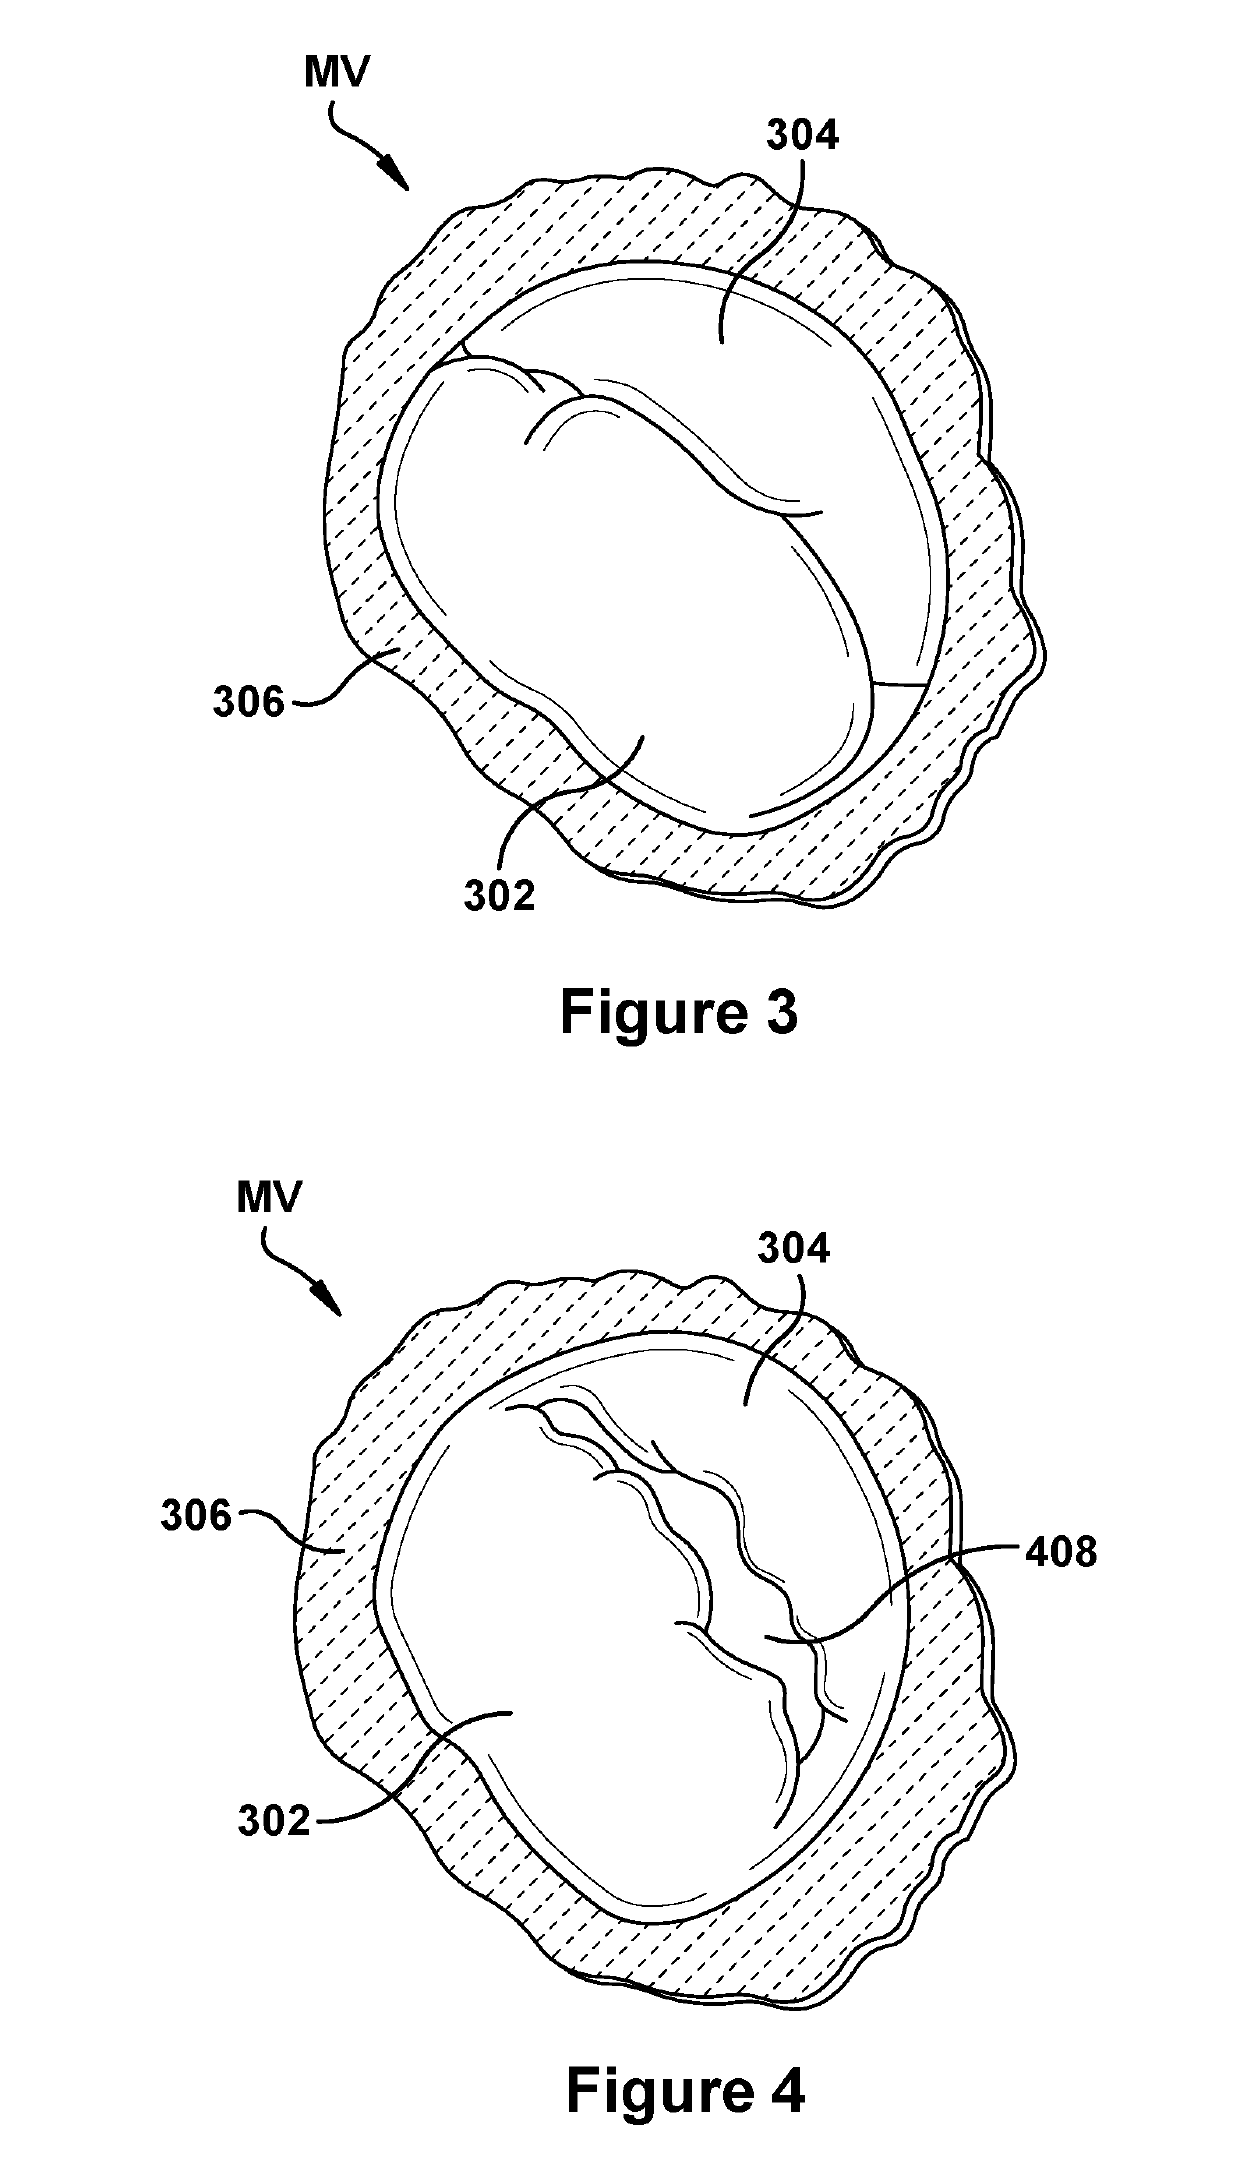 Native valve repair devices and procedures